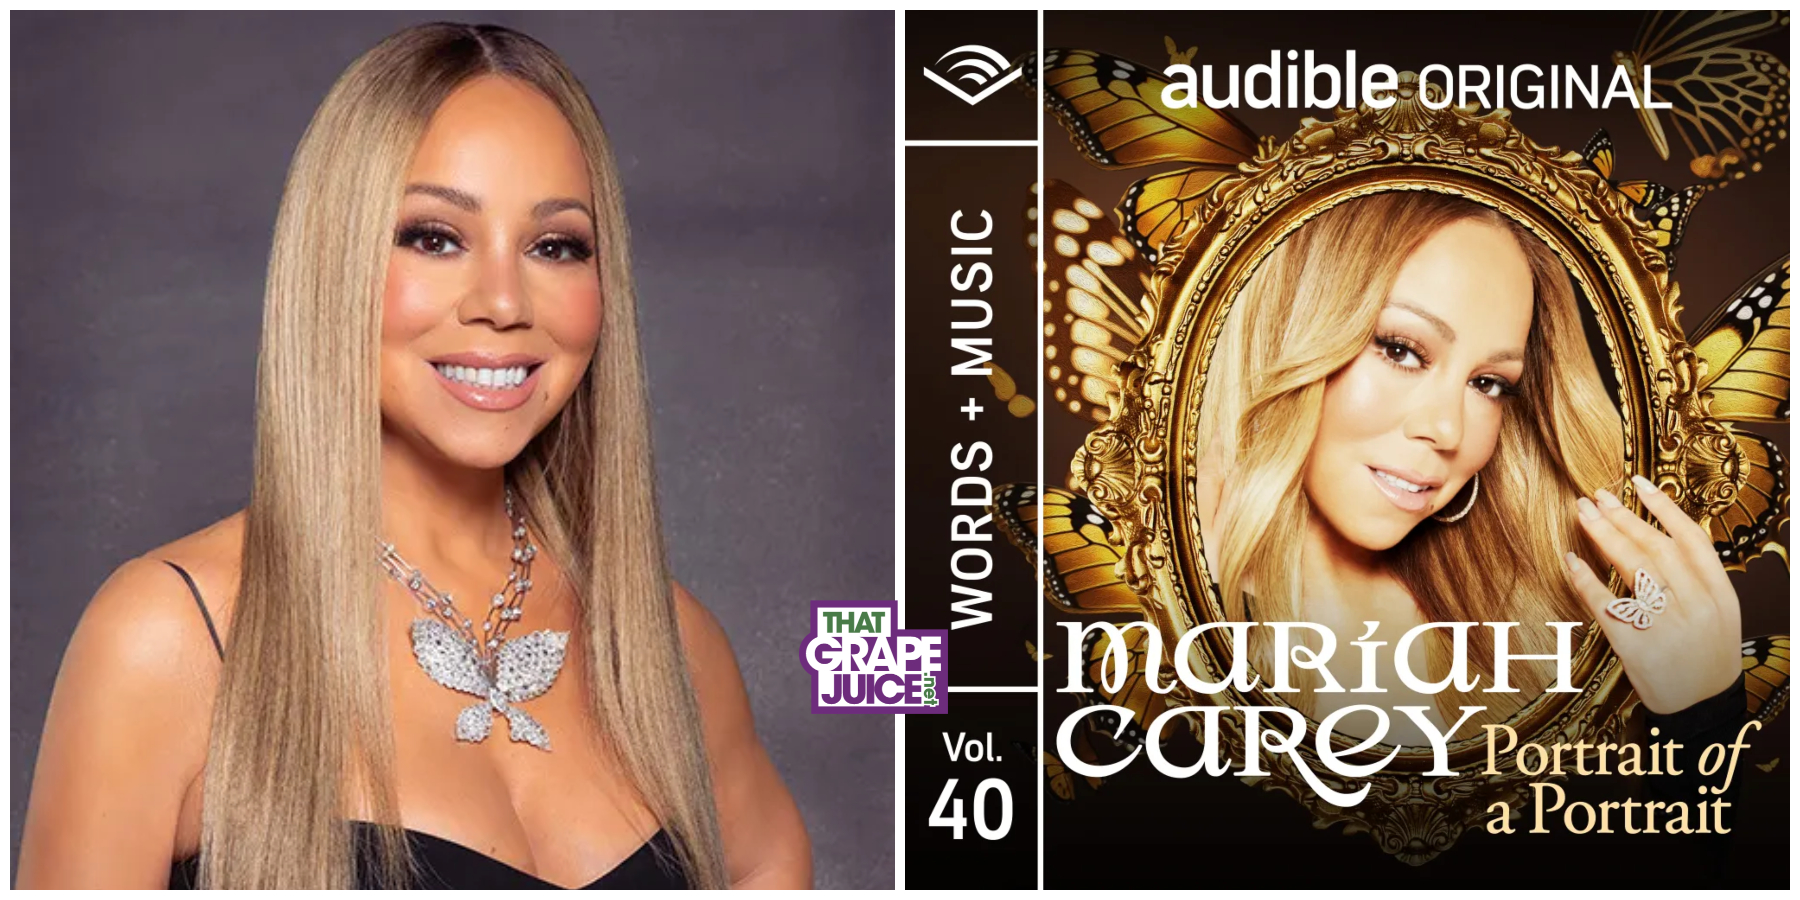 ‘Portrait of a Portrait’: Mariah Carey’s ‘Words + Music’ Installment To Debut on Audible This Month [Preview]